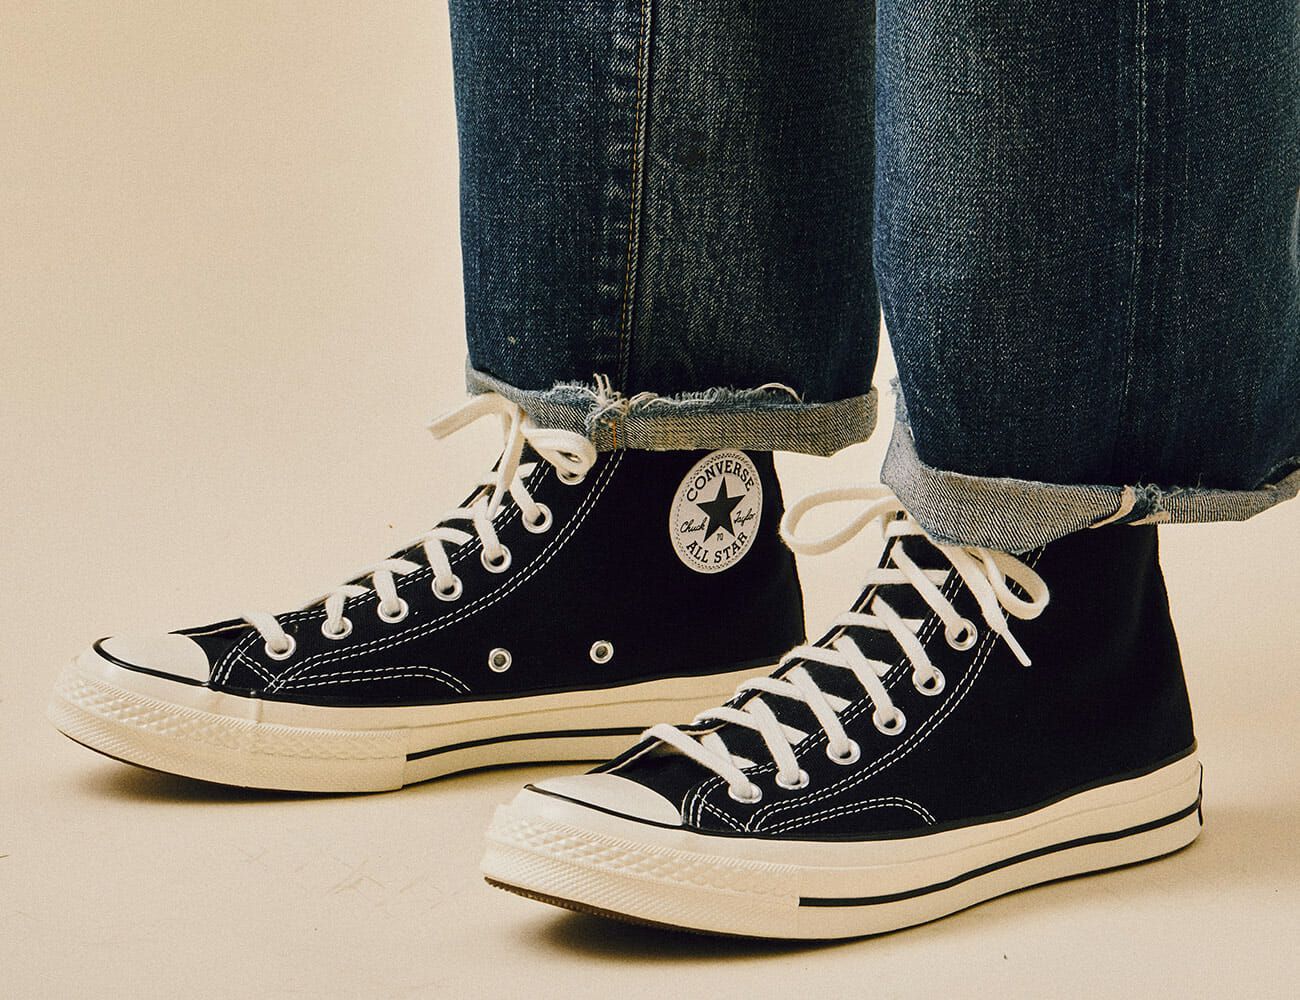 Converse Classic Chucks vs. Chuck 70s: Which Pair Should You Get? وكالة جيب